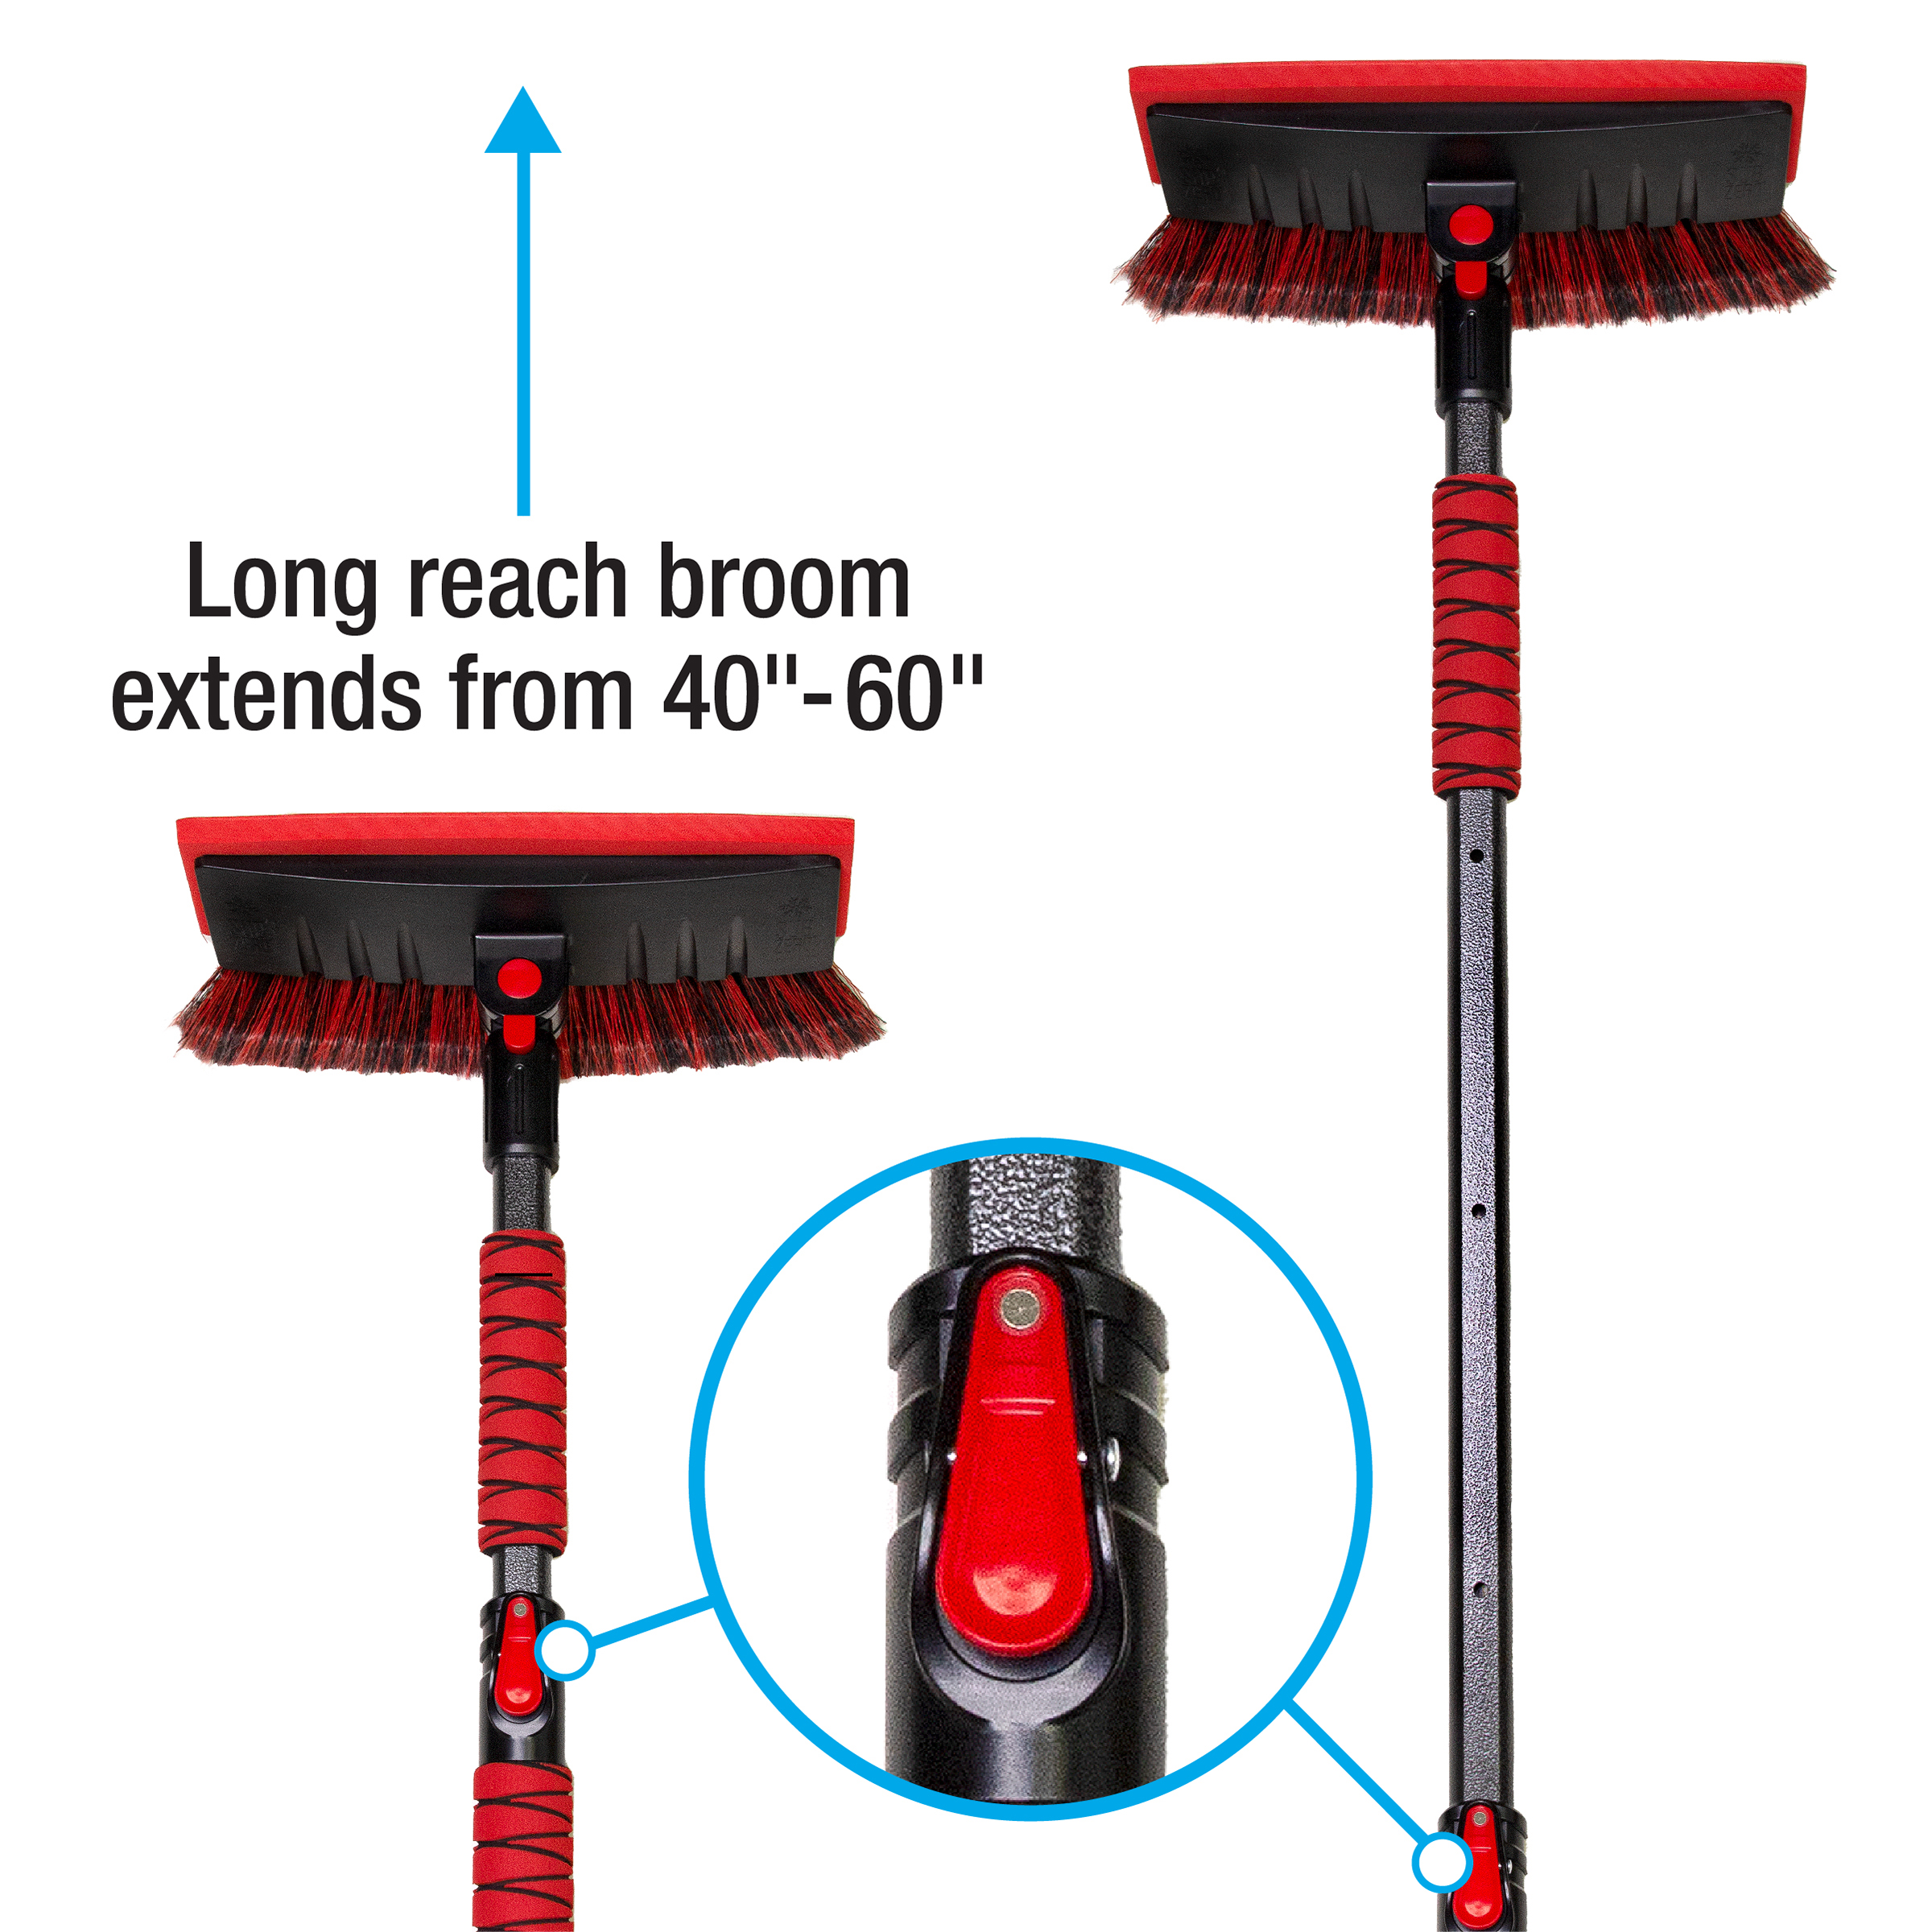 Subzero 60" Maxx Force Snowbroom with Ice Scraper, Red and Black, 1 Pack, 1220141061 - image 2 of 7